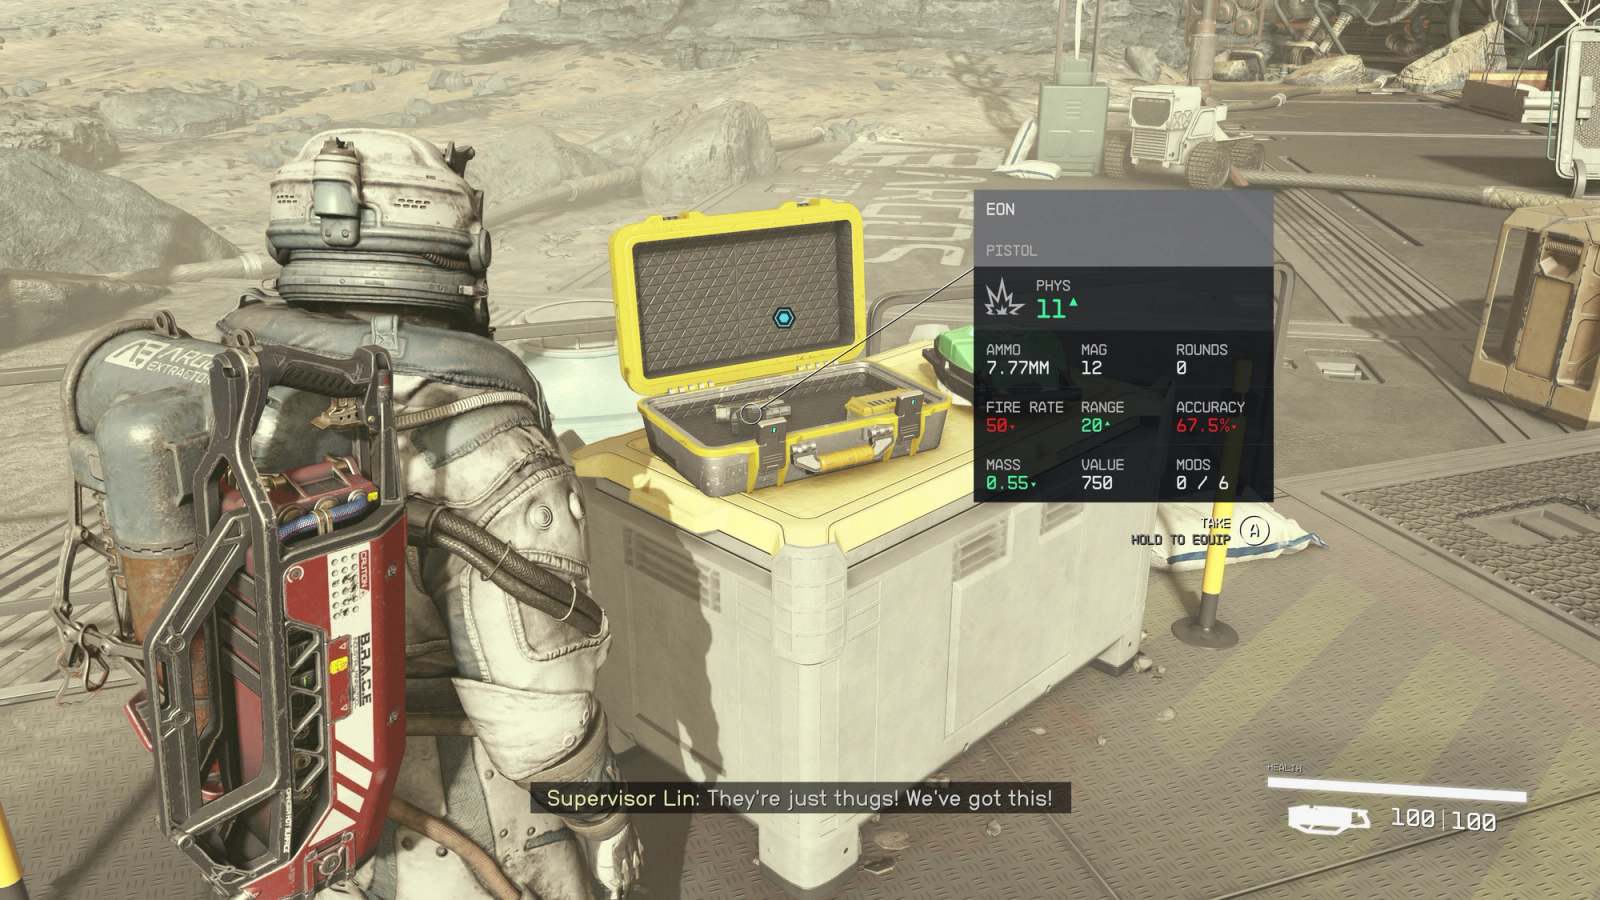 player next to a crate containing the eon pistol